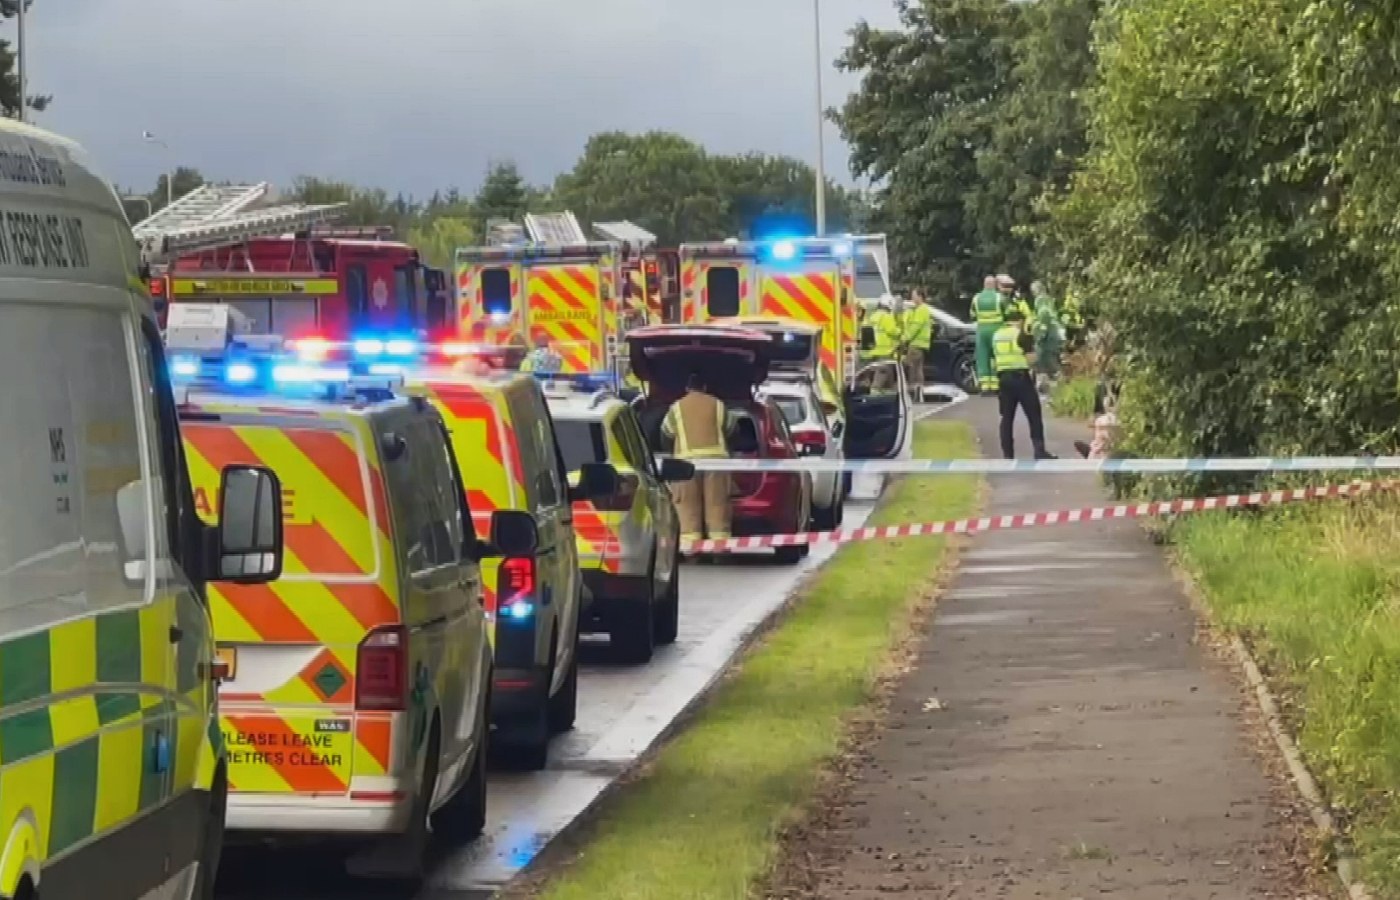 Emergency services were called to the B902 New Carron Road on Saturday at around 6.10pm on Saturday